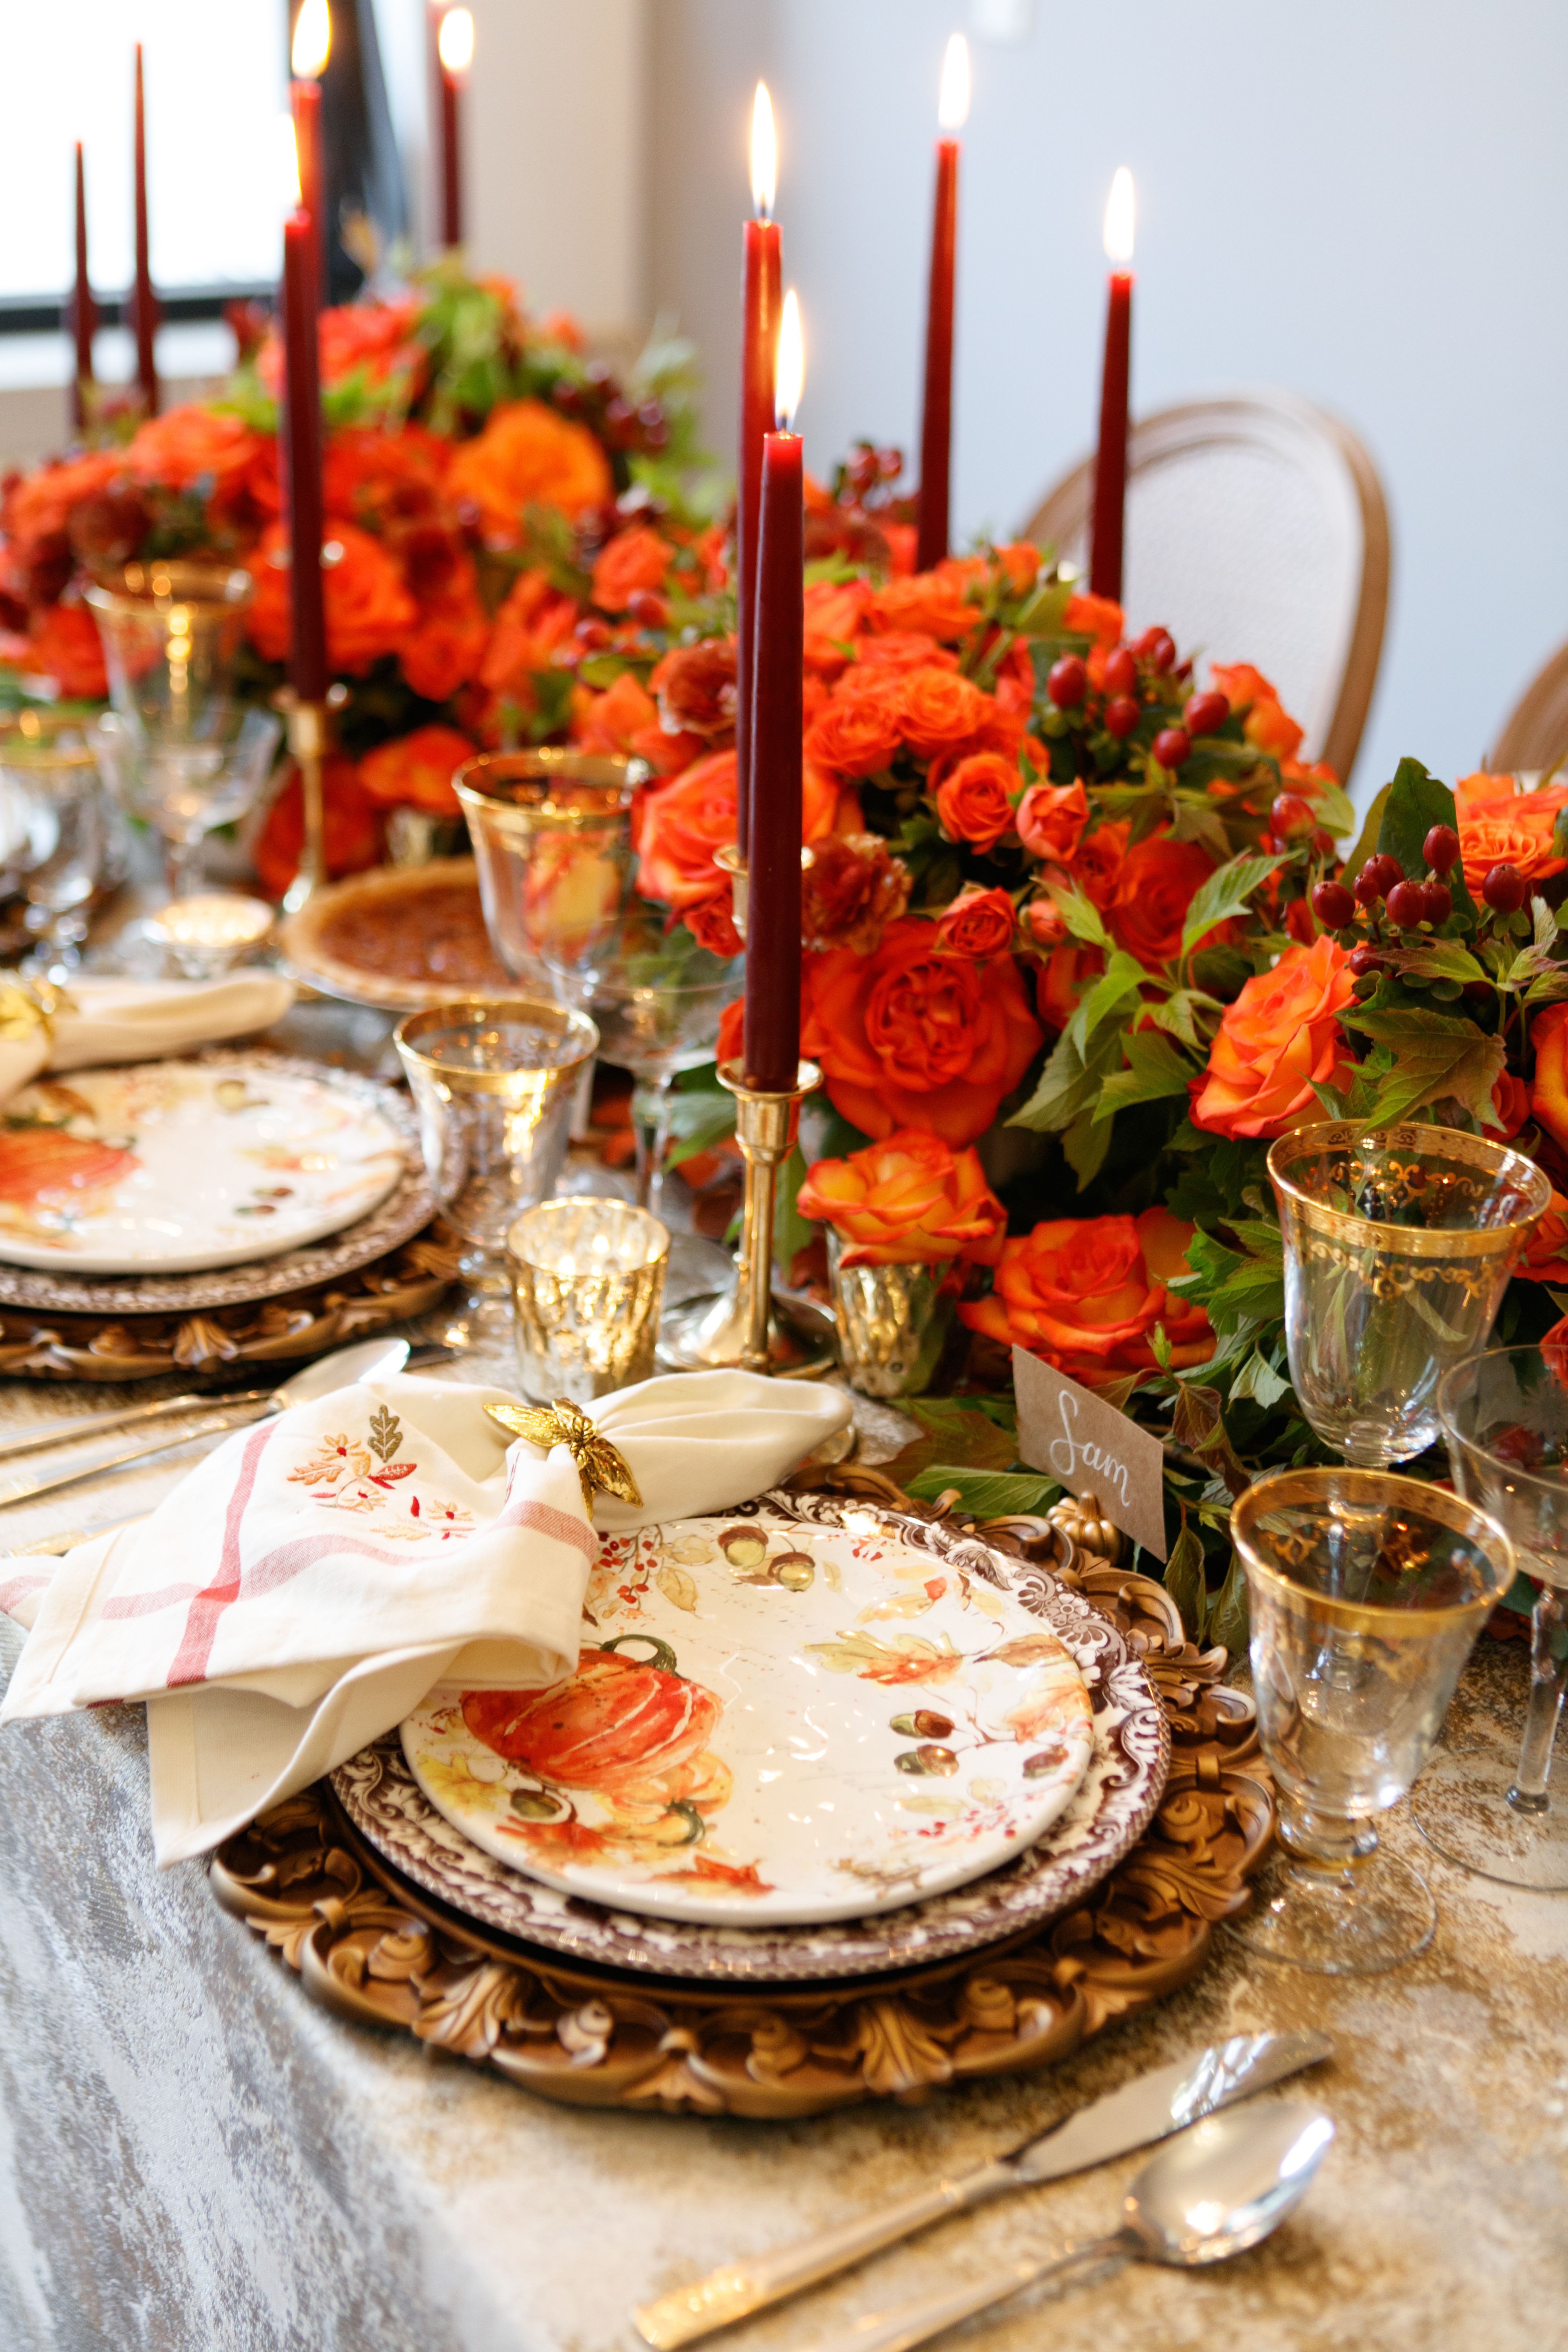 47 Beautiful Centerpiece Ideas for Your Thanksgiving Table